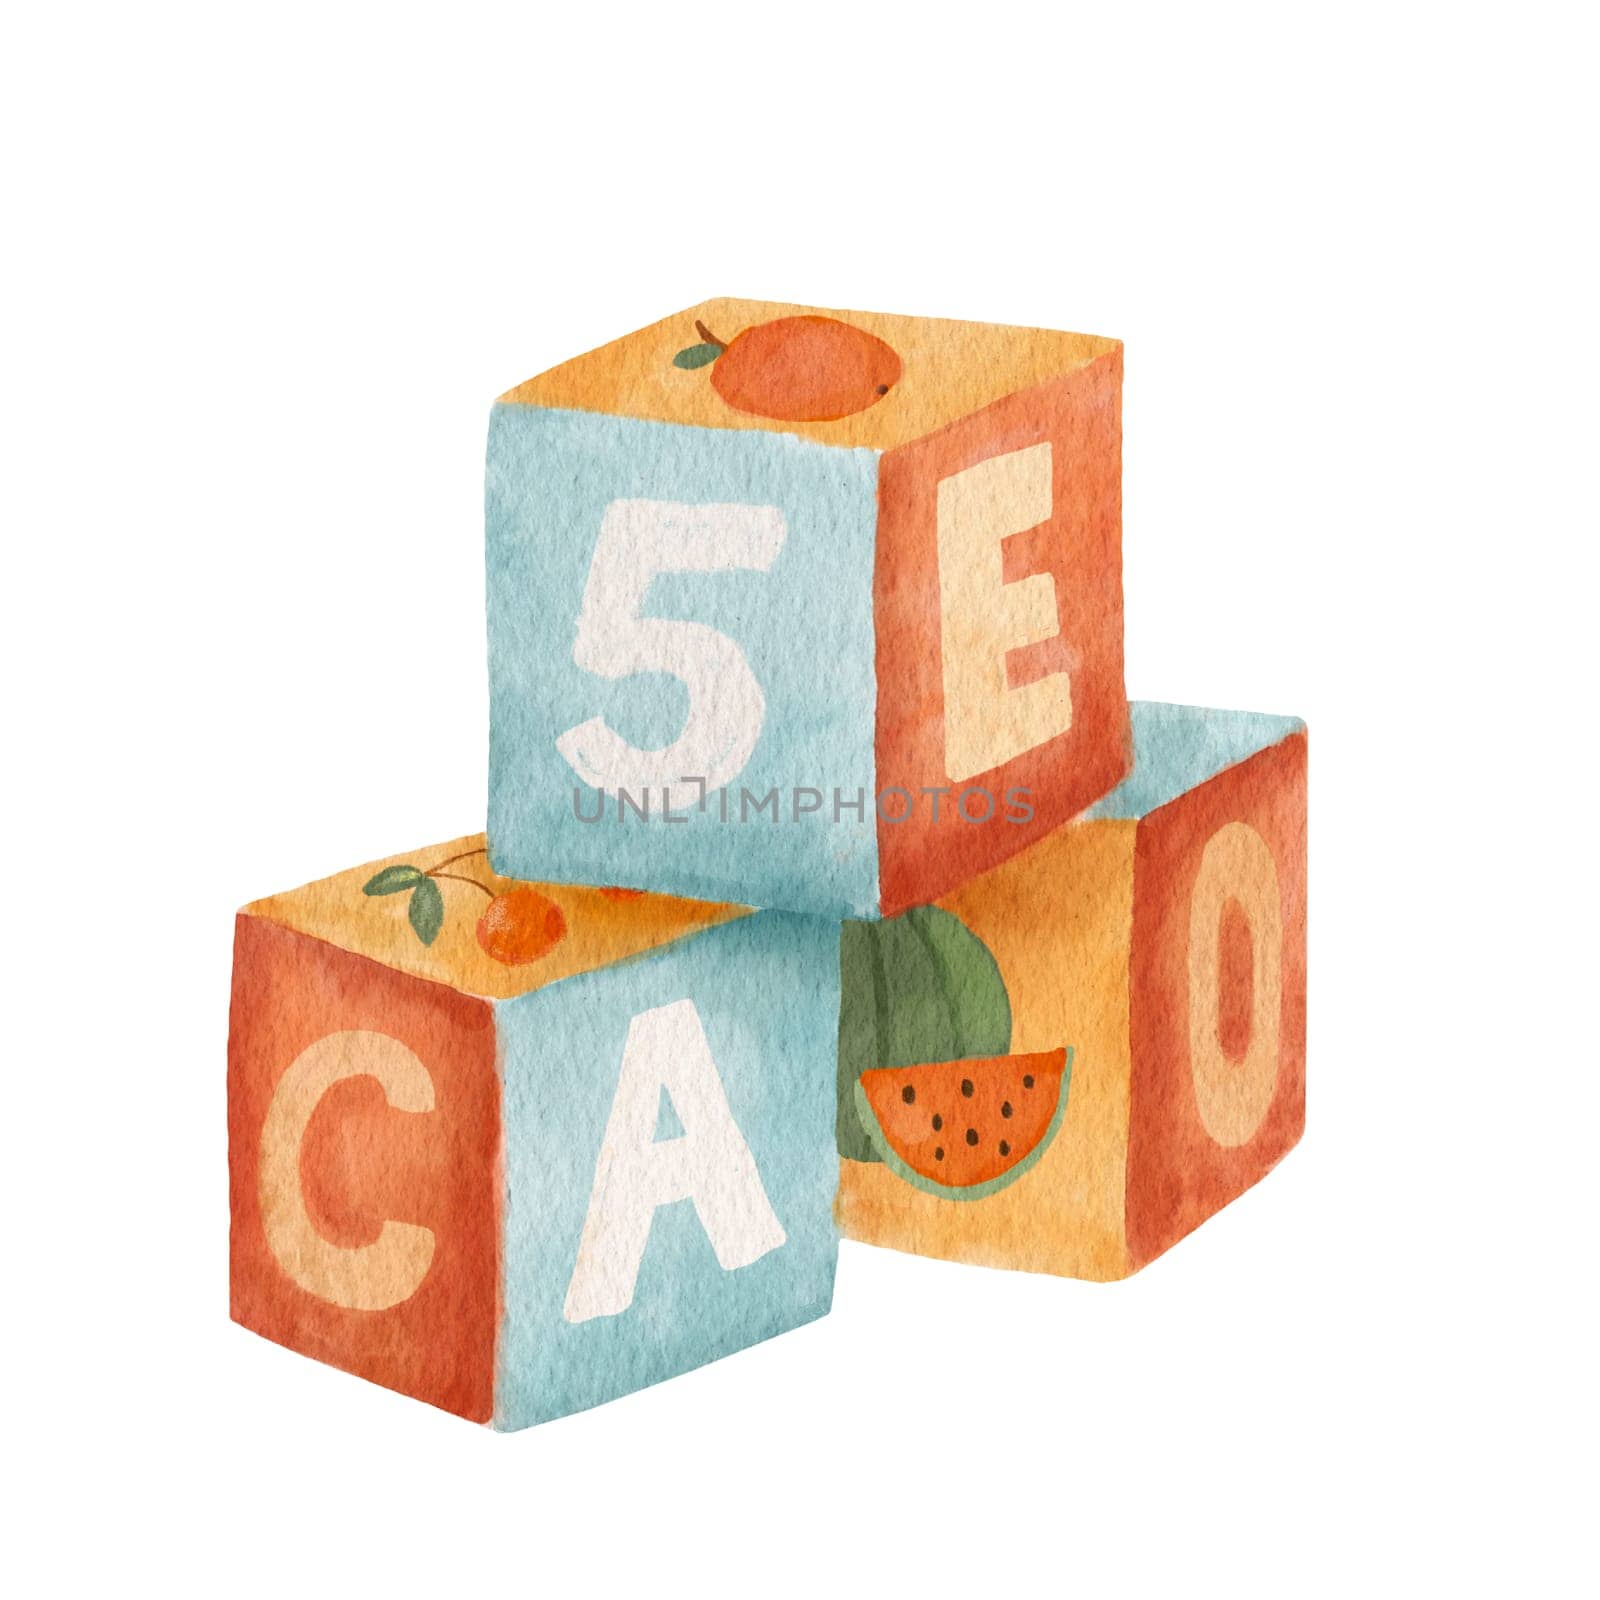 Cute baby toy cubes with letters and numbers clipart. Watercolor illustration isolated on white